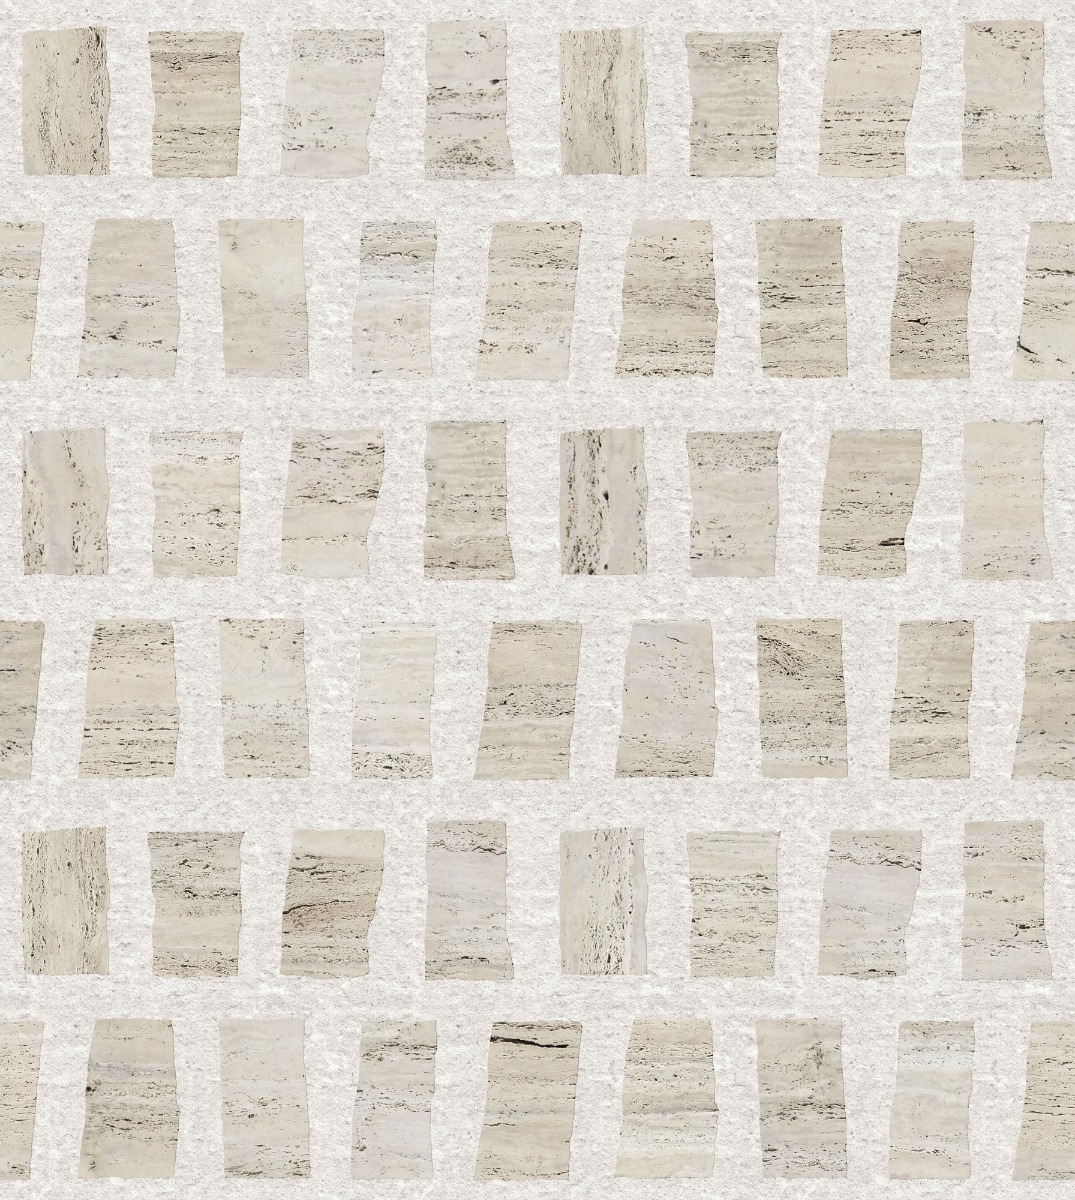 A seamless stone texture with travertine blocks arranged in a Scarpa pattern